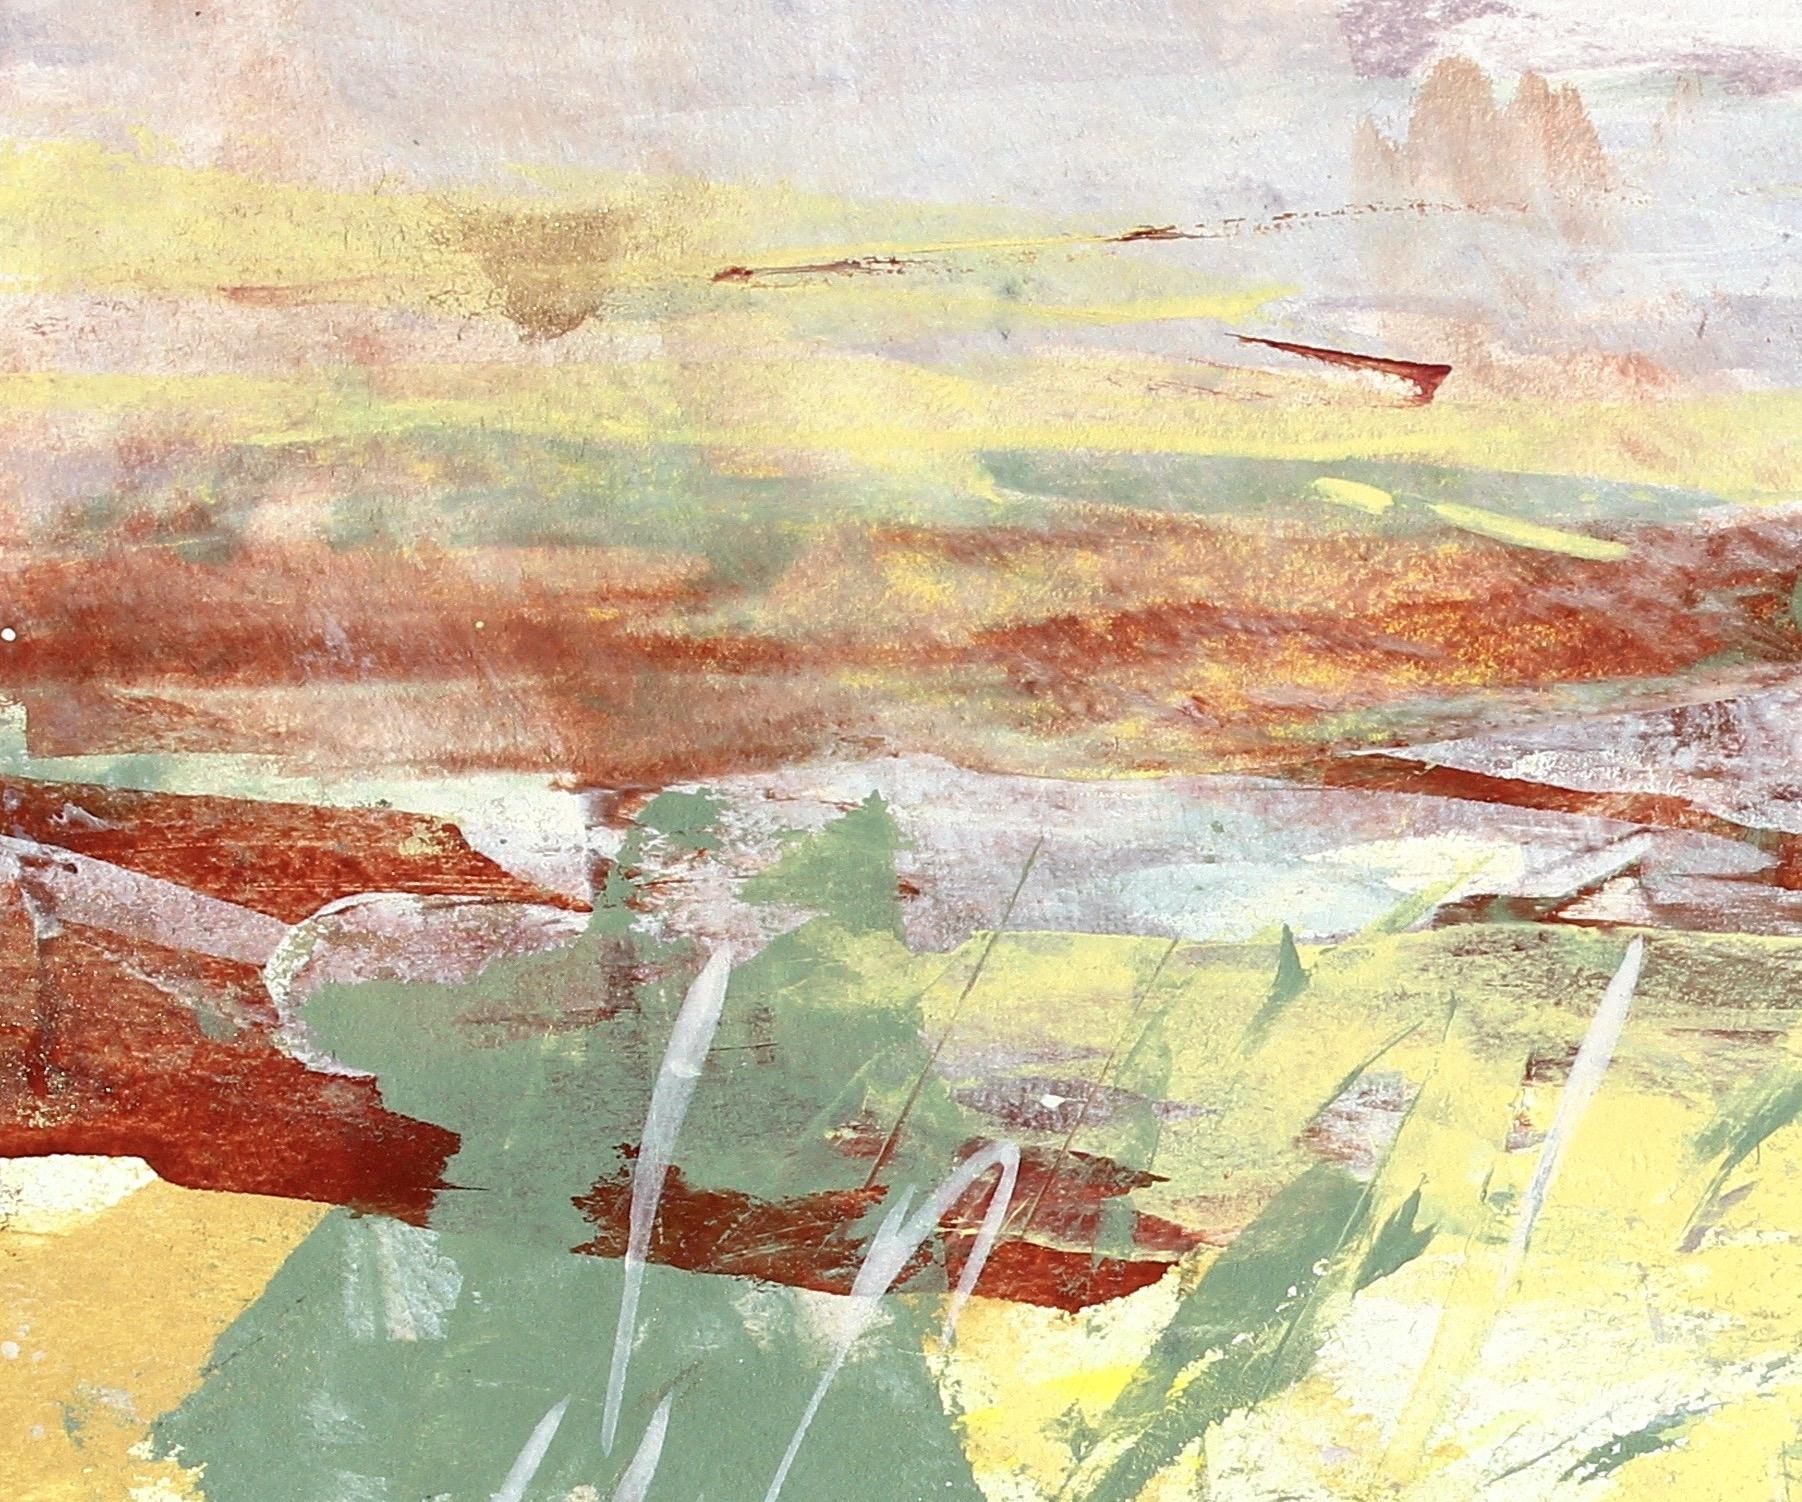 Desertscape #5 - Painting by Simona Gocan